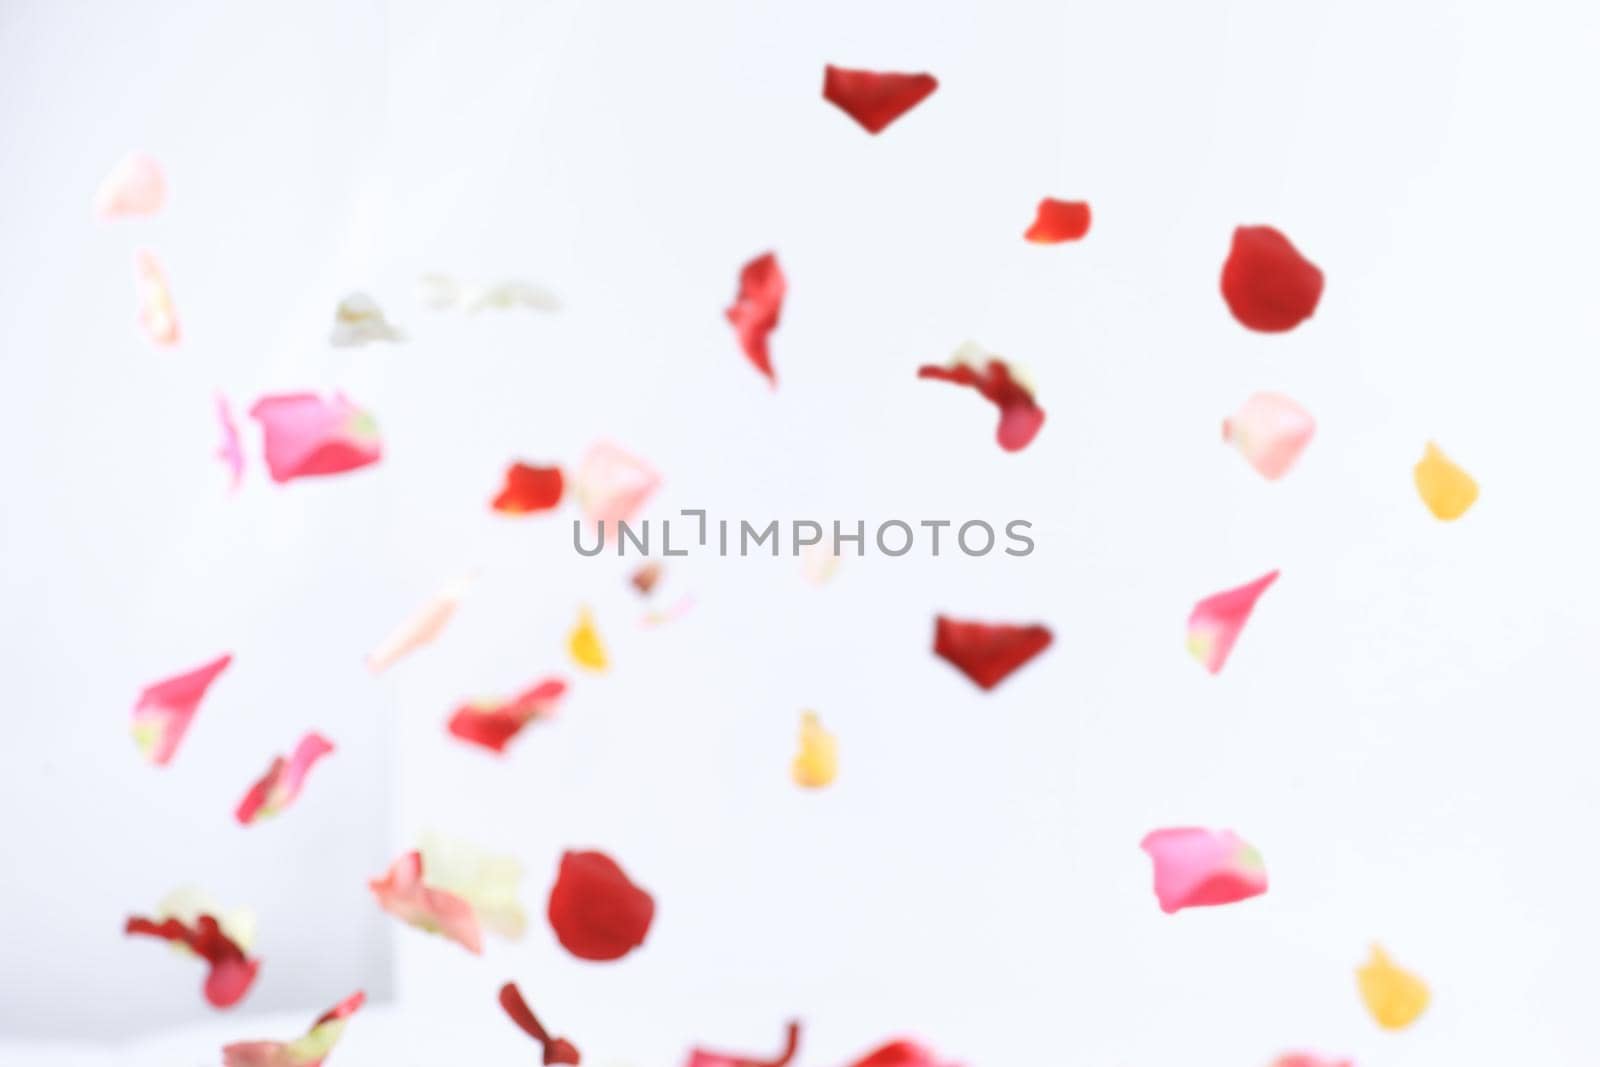 blurred image of pink petals on white background.photo with place for text.